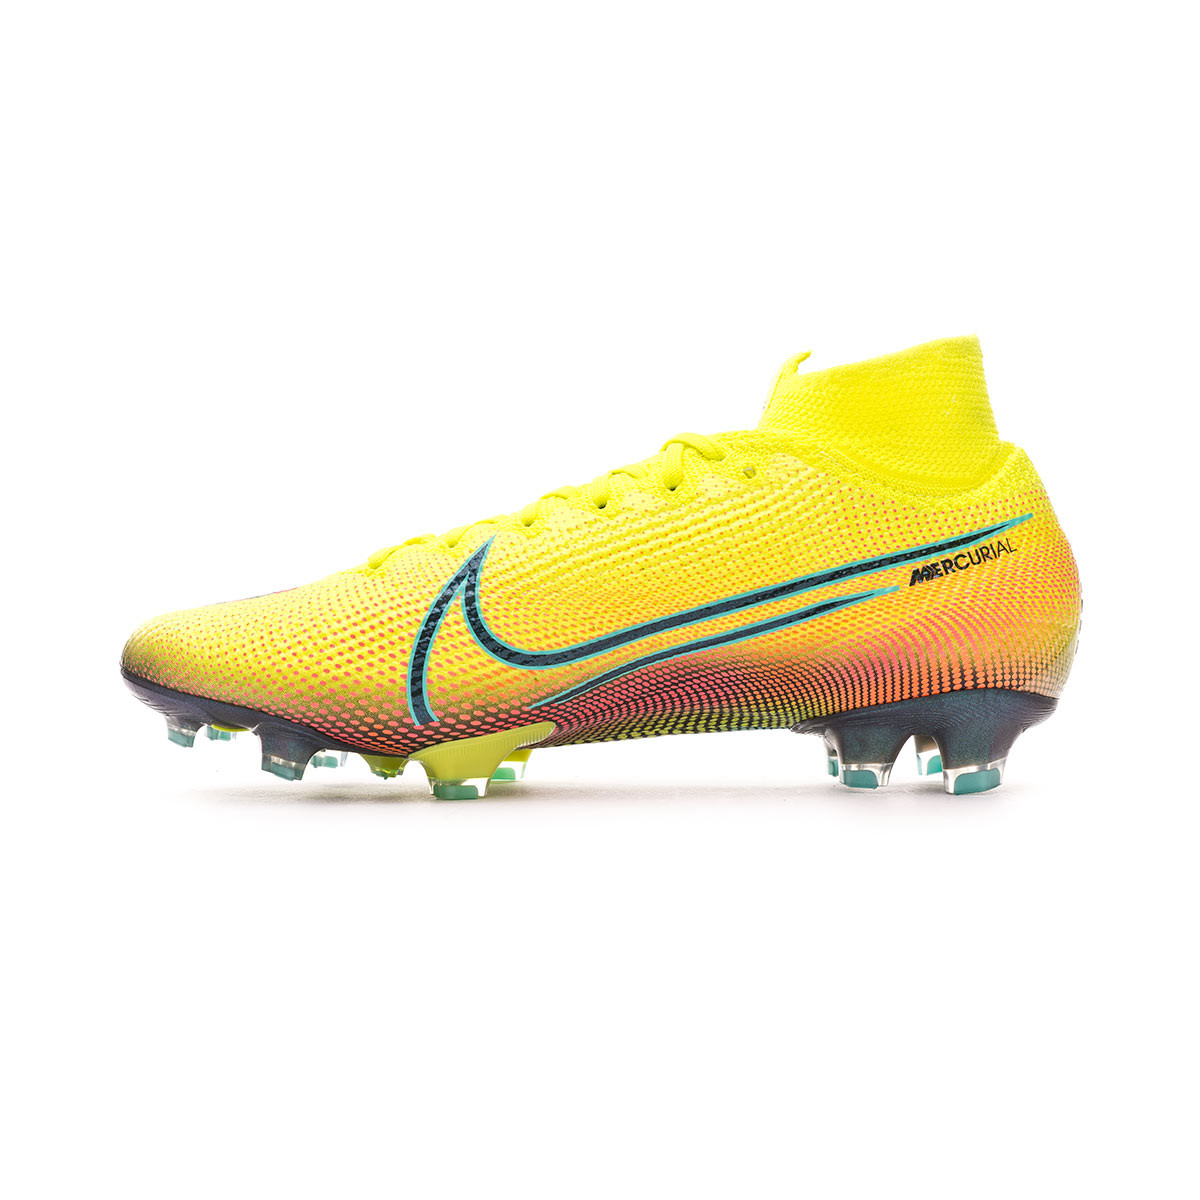 nike football shoes mercurial superfly